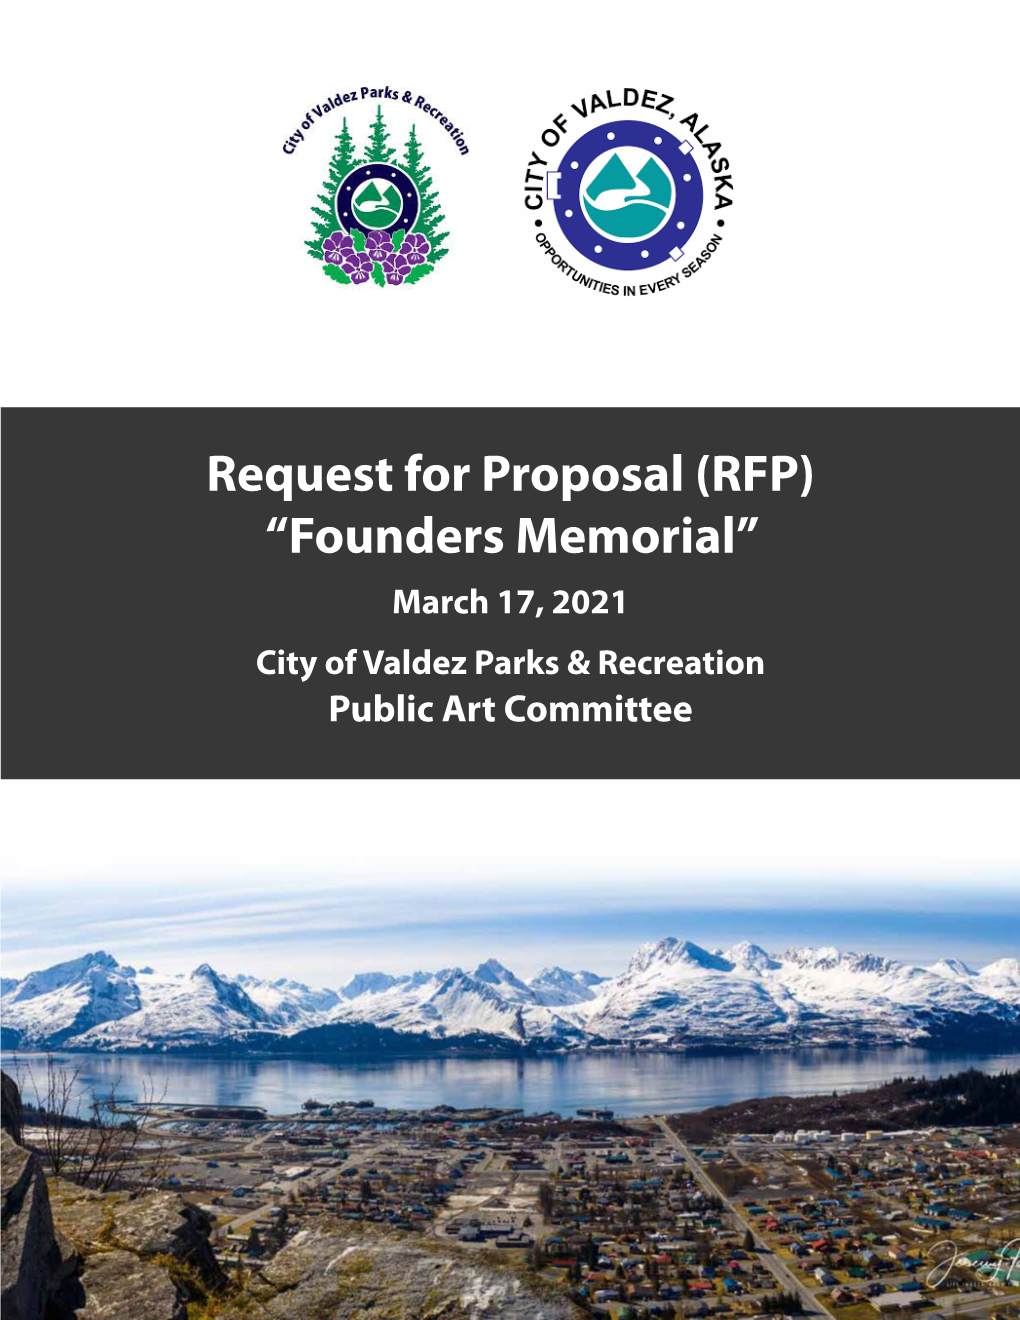 (RFP) “Founders Memorial” March 17, 2021 City of Valdez Parks & Recreation Public Art Committee the Call for Artists